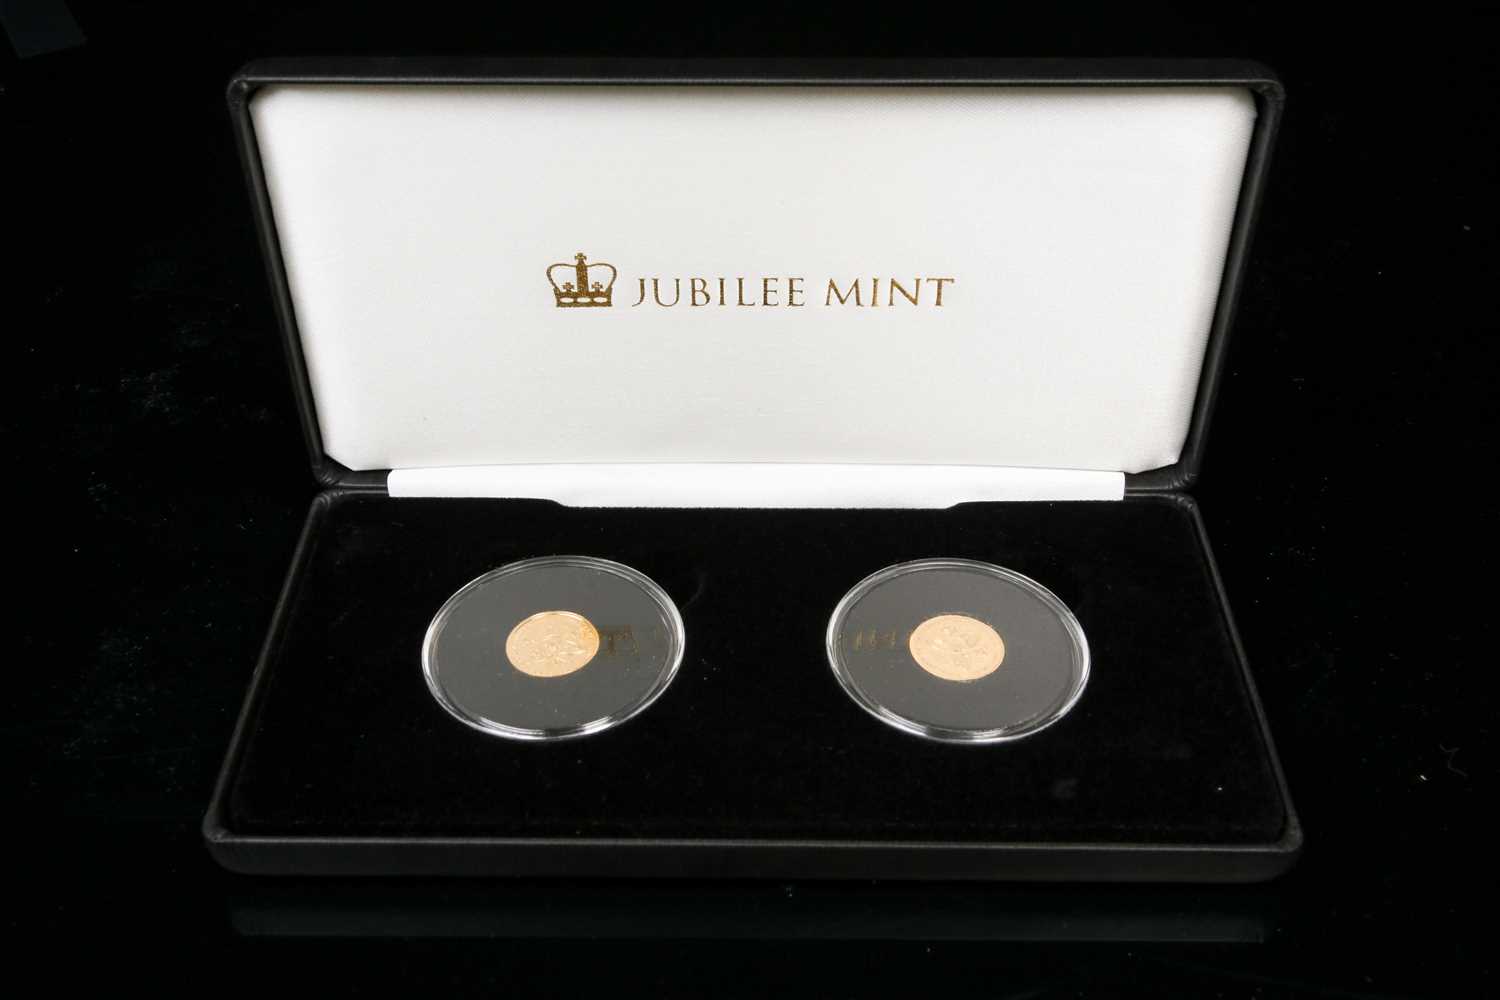 The Prince George & Princess Charlotte of Cambridge 9ct gold commemorative medallions, proof like - Image 5 of 5